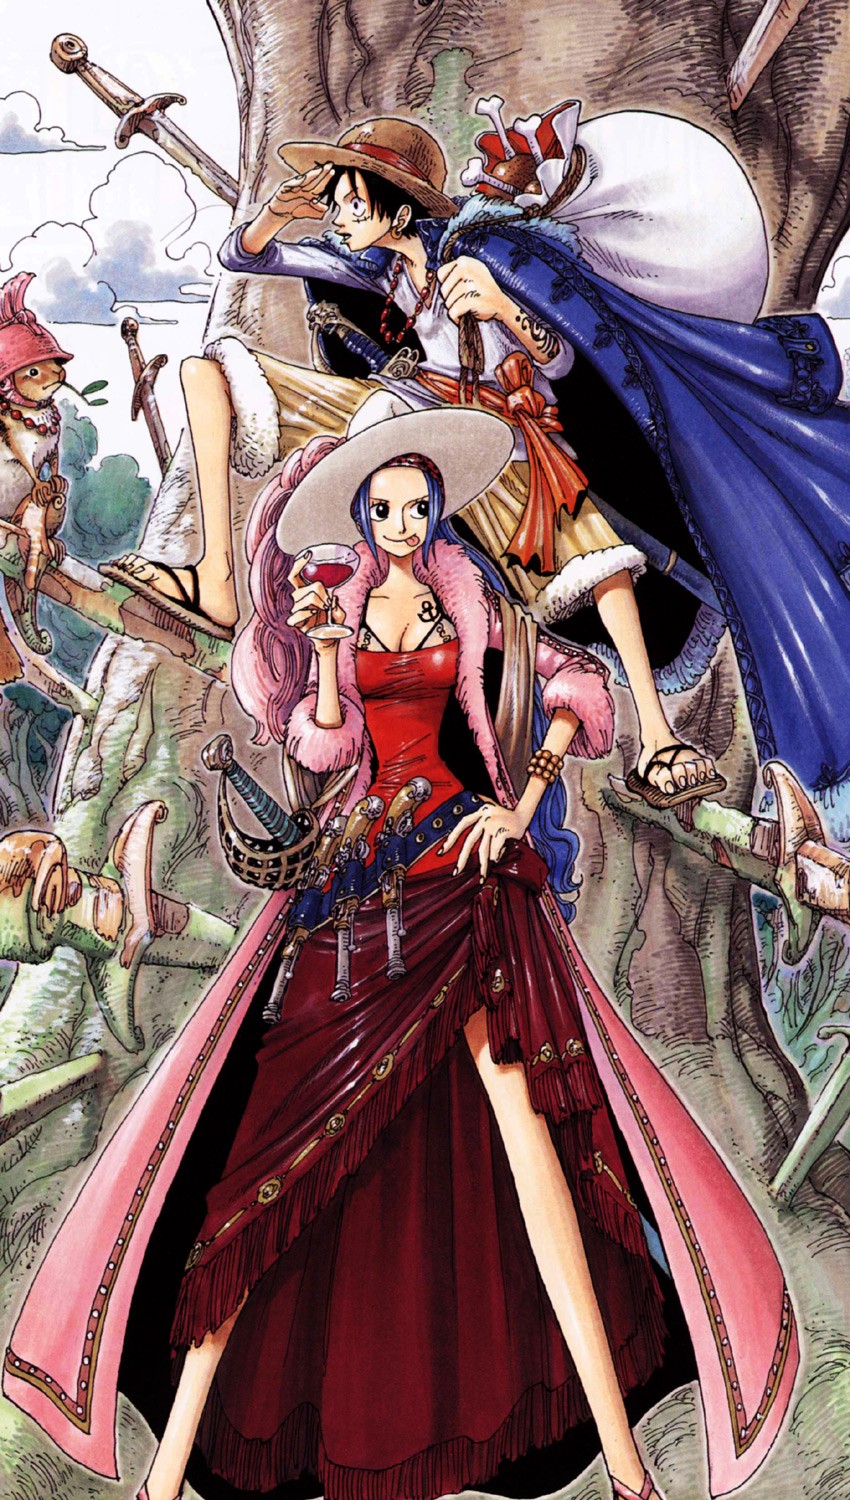 Image Of Galerie Wallpaper One Piece Image Sur